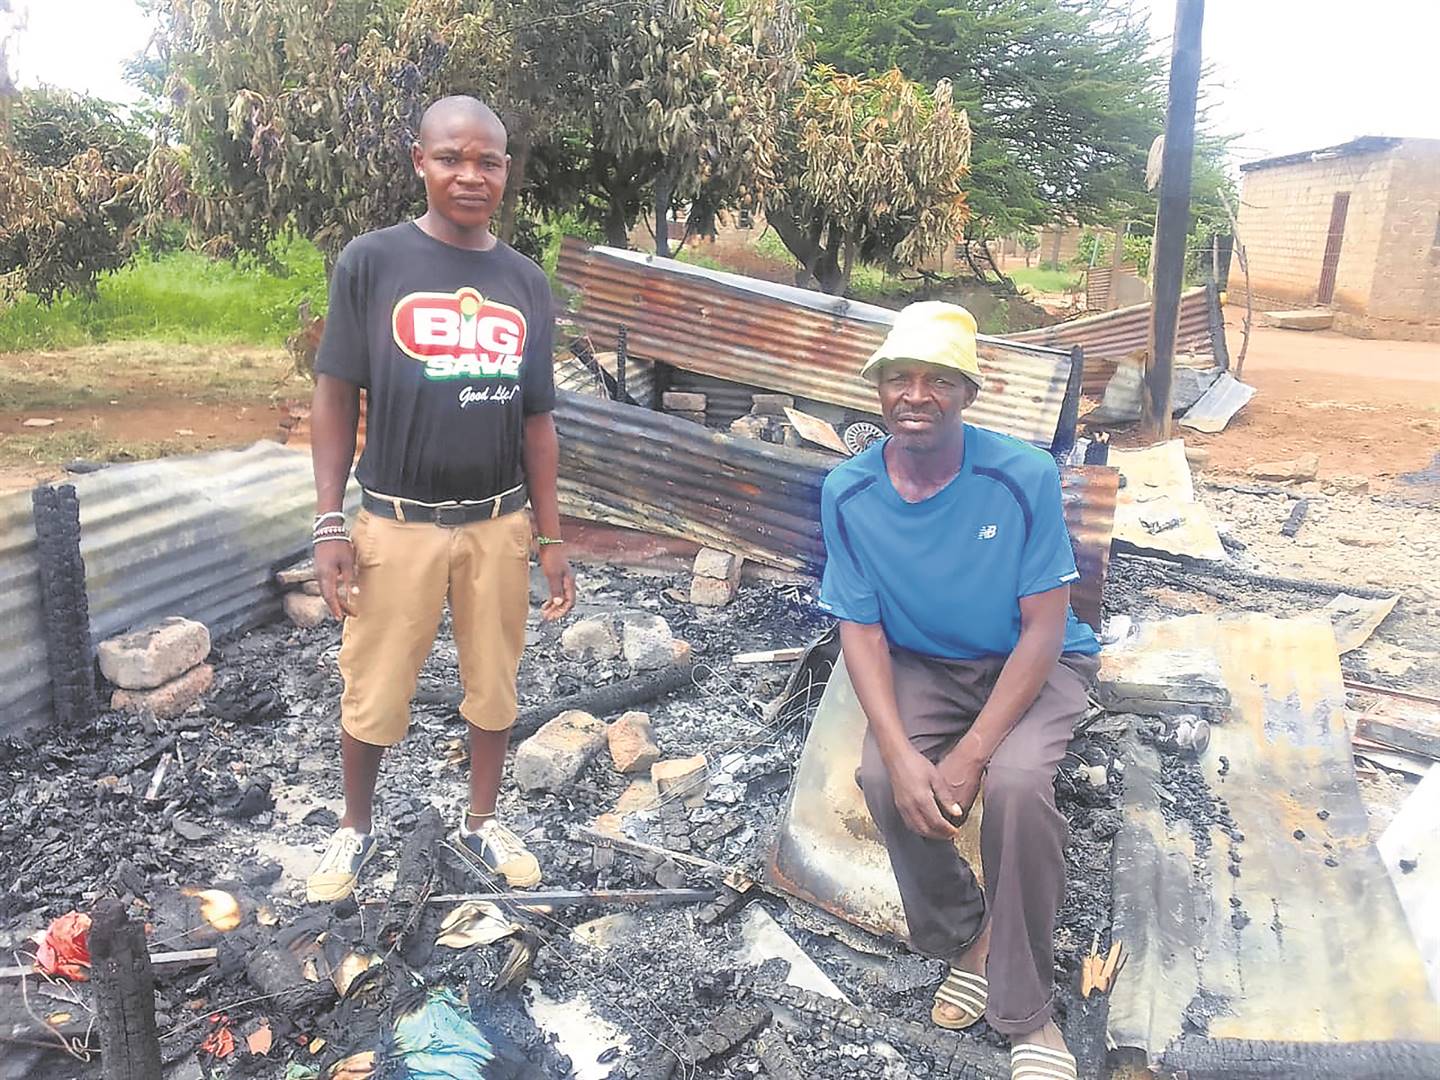 Gogo Pauline Sithole’s grandson Mpho and son Samuel are asking for help to rebuild her shack. Photo by Raymond Morare